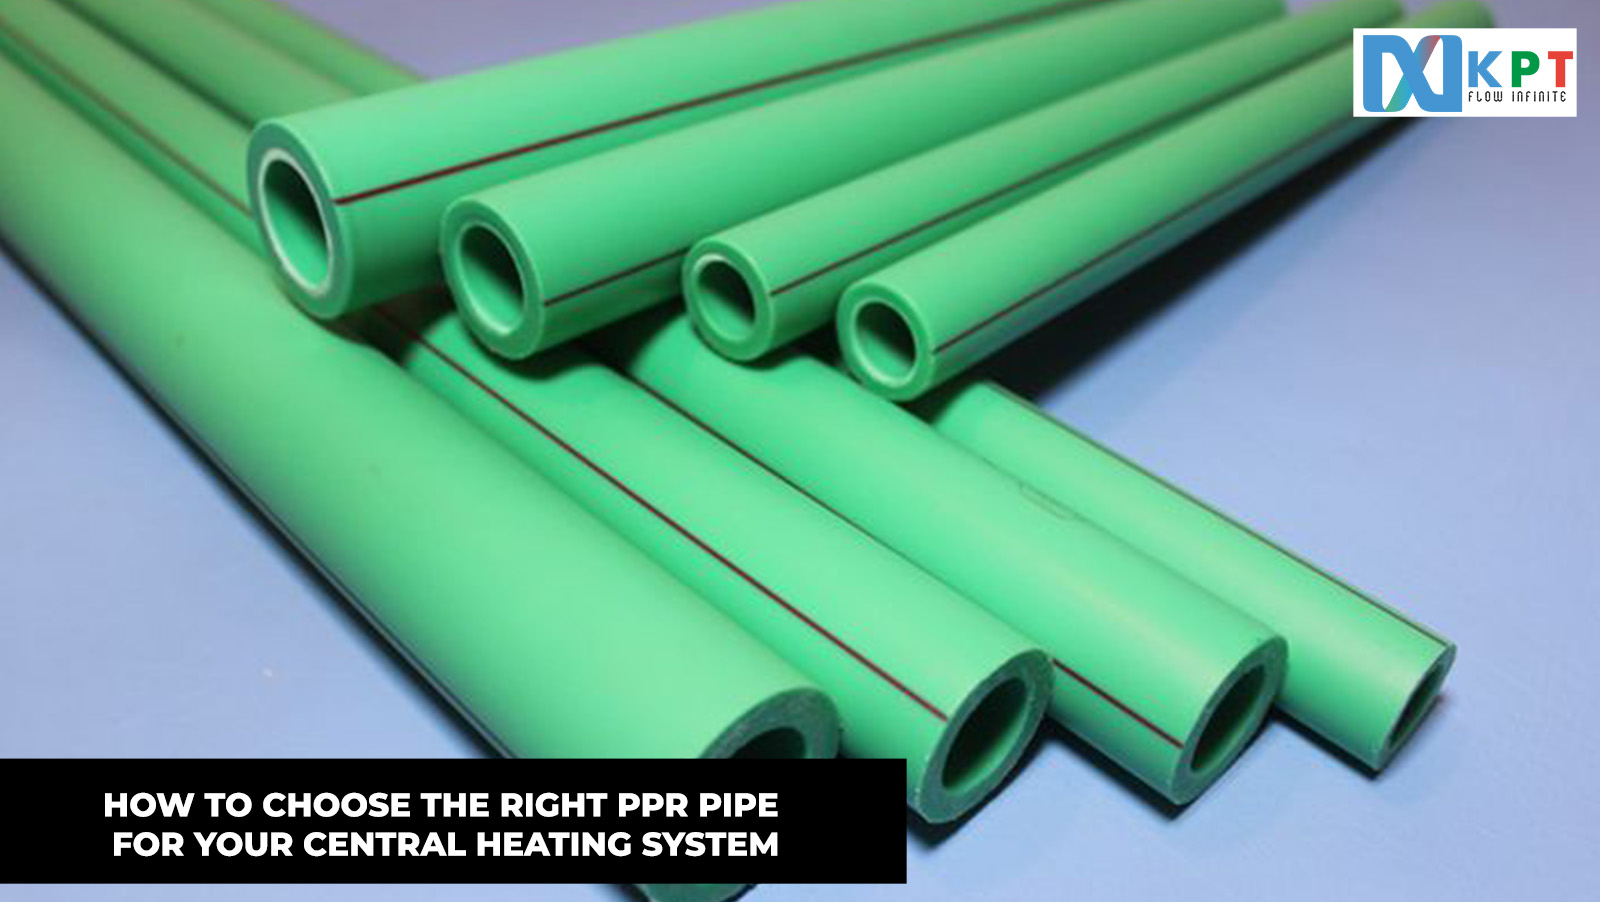 How to Choose the Right PPR Pipe for Your Central Heating System